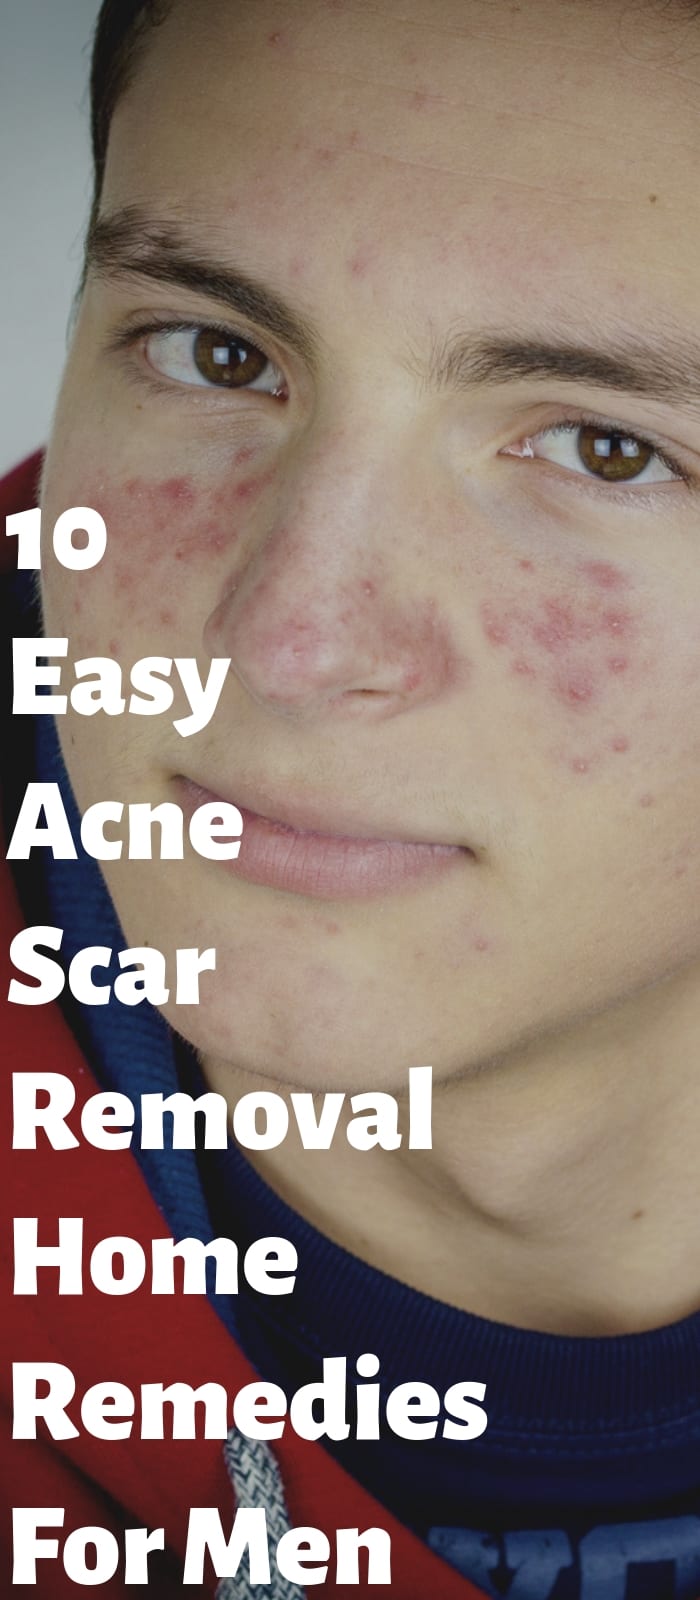 10 Easy Acne Scar Removal Home Remedies For Men!